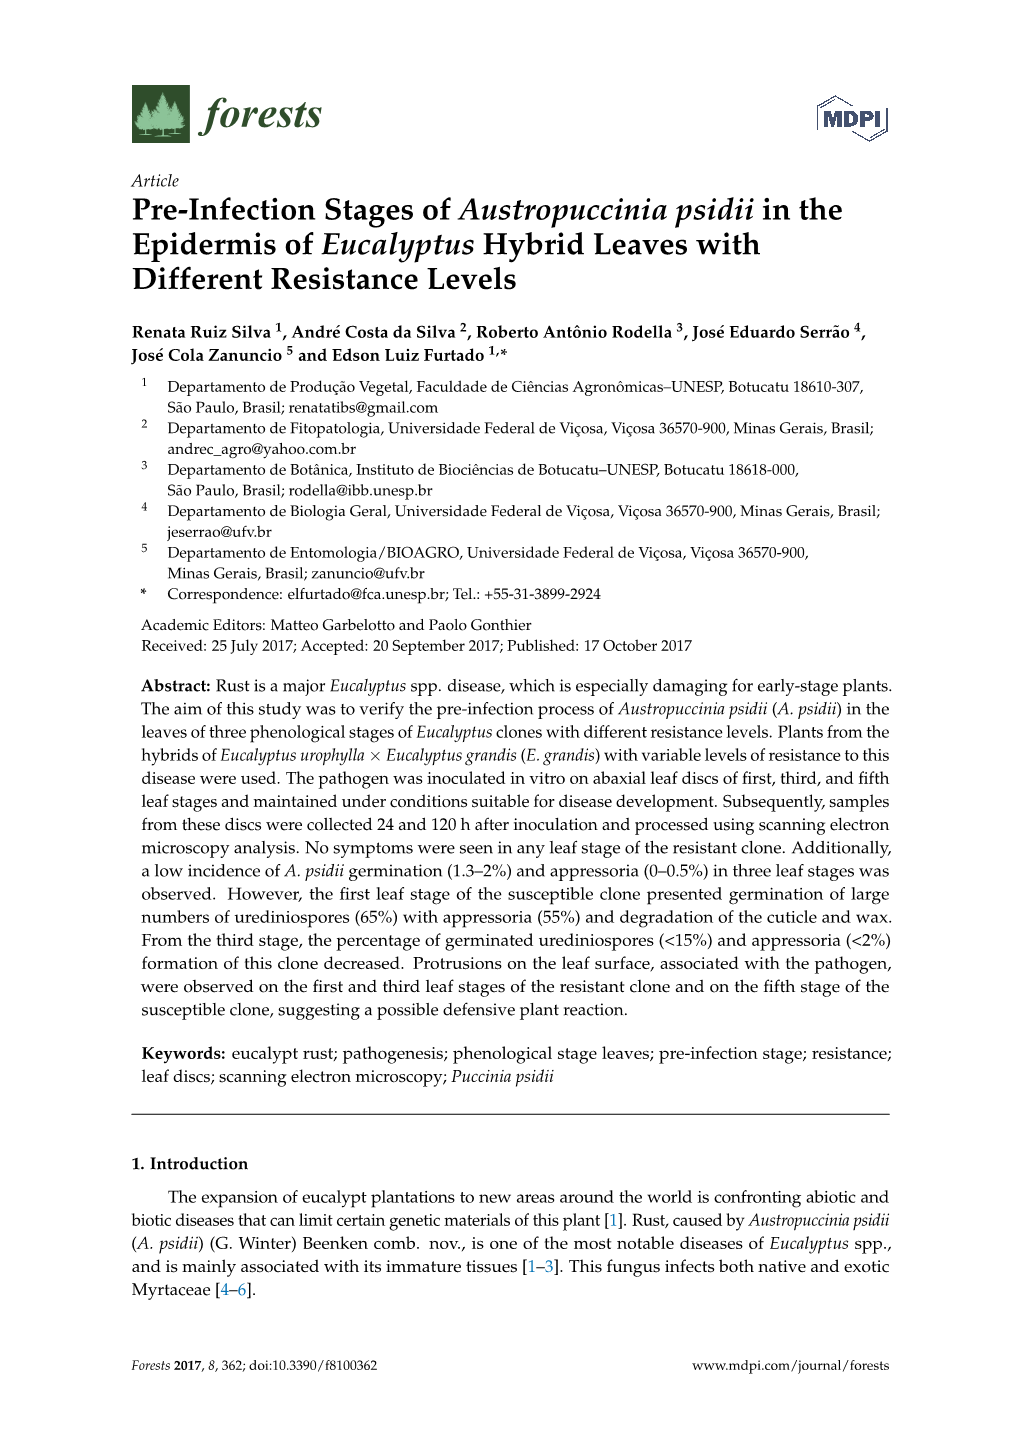 Pre-Infection Stages of Austropuccinia Psidii in the Epidermis of Eucalyptus Hybrid Leaves with Different Resistance Levels